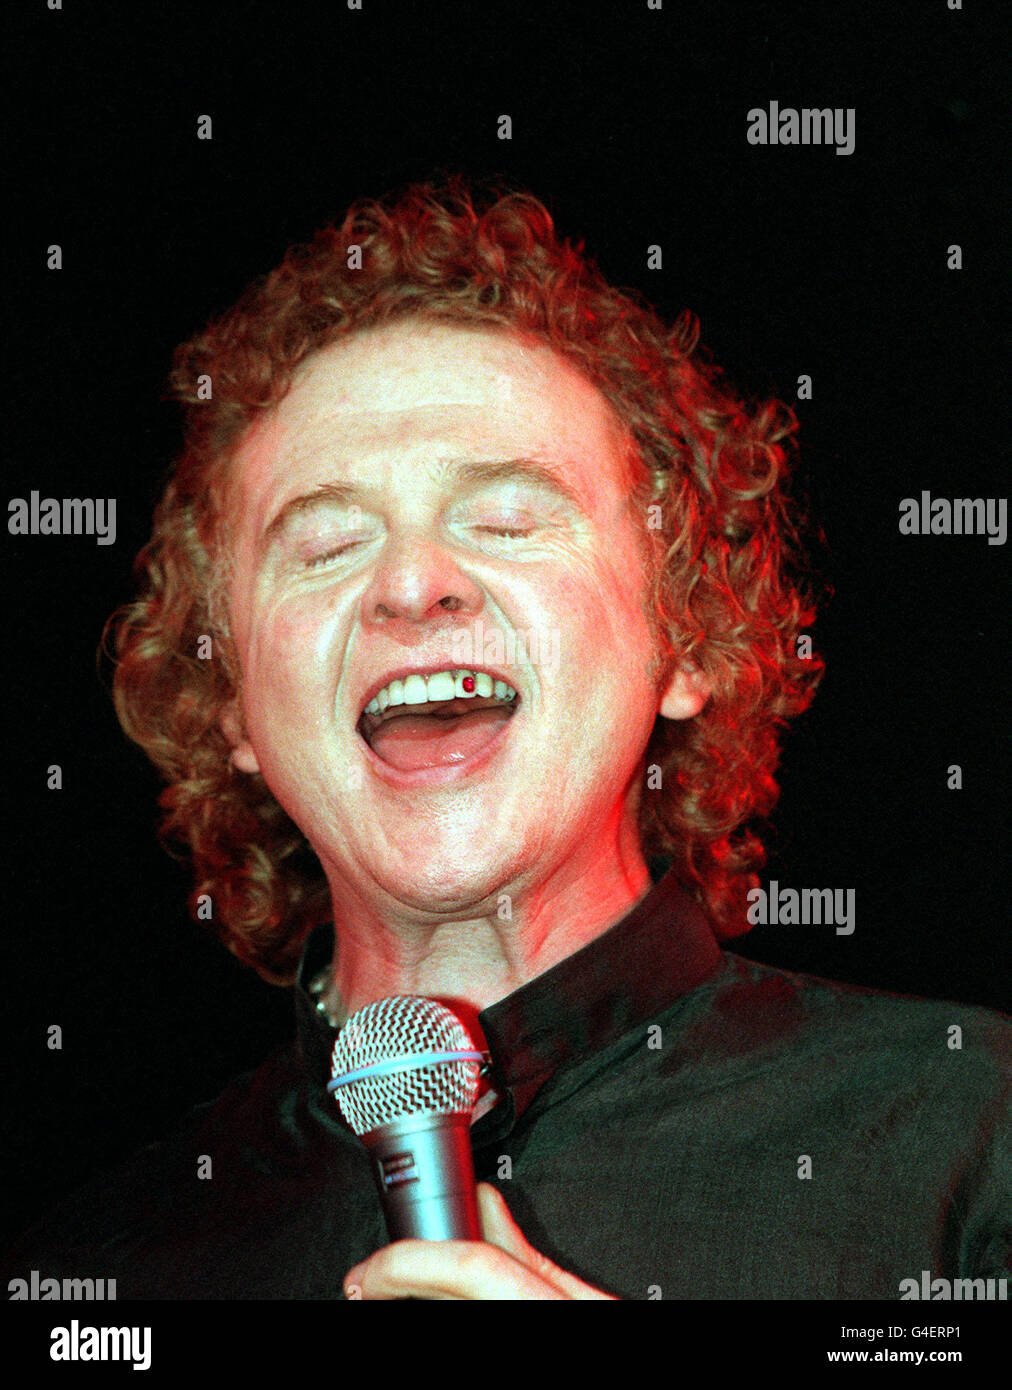 PA NEWS 16/9/98 'SIMPLY RED' SINGER MICK HUCKNALL SINGS DURING REHEARSALS  THE NIGHT BEFORE THEIR CONCERT AT THE LYCEUM THEATRE, LONDON Stock Photo -  Alamy